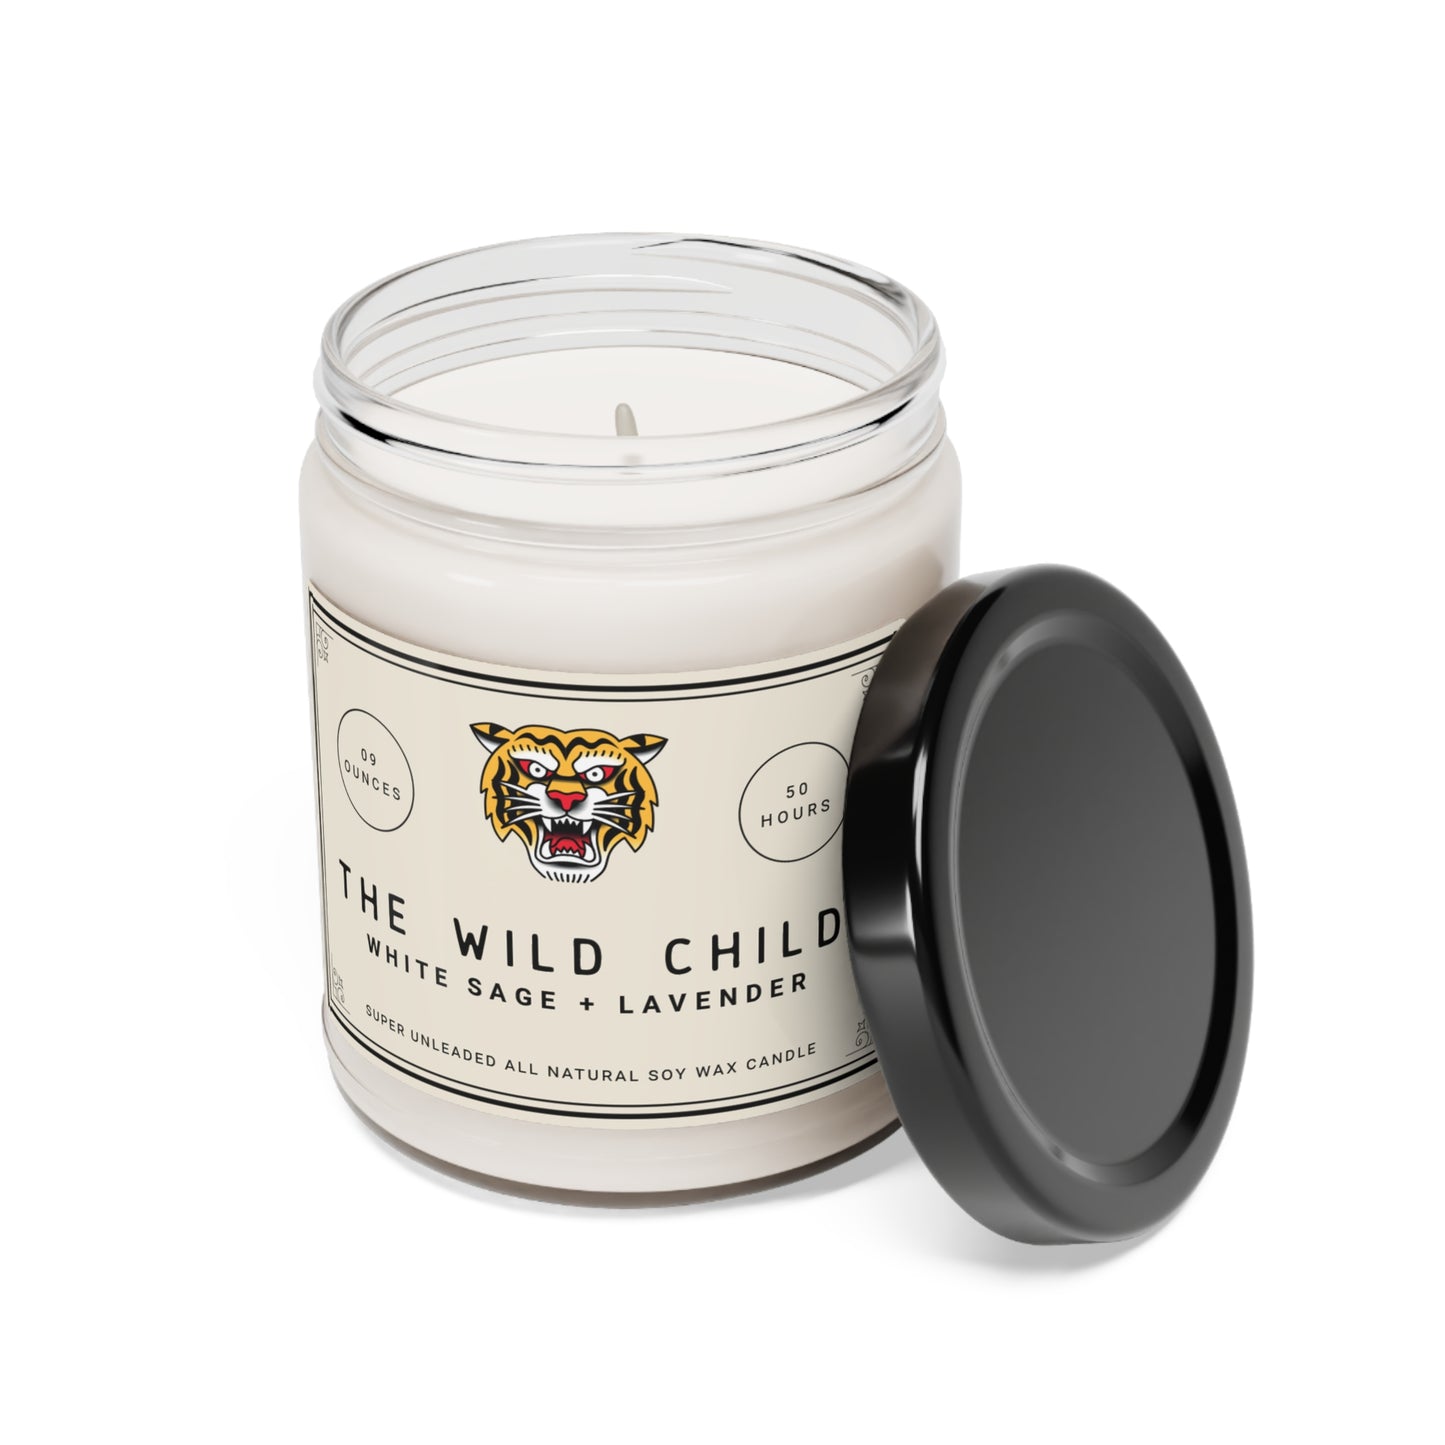 The Wild Child (White Sage + Lavender) Soy Candle